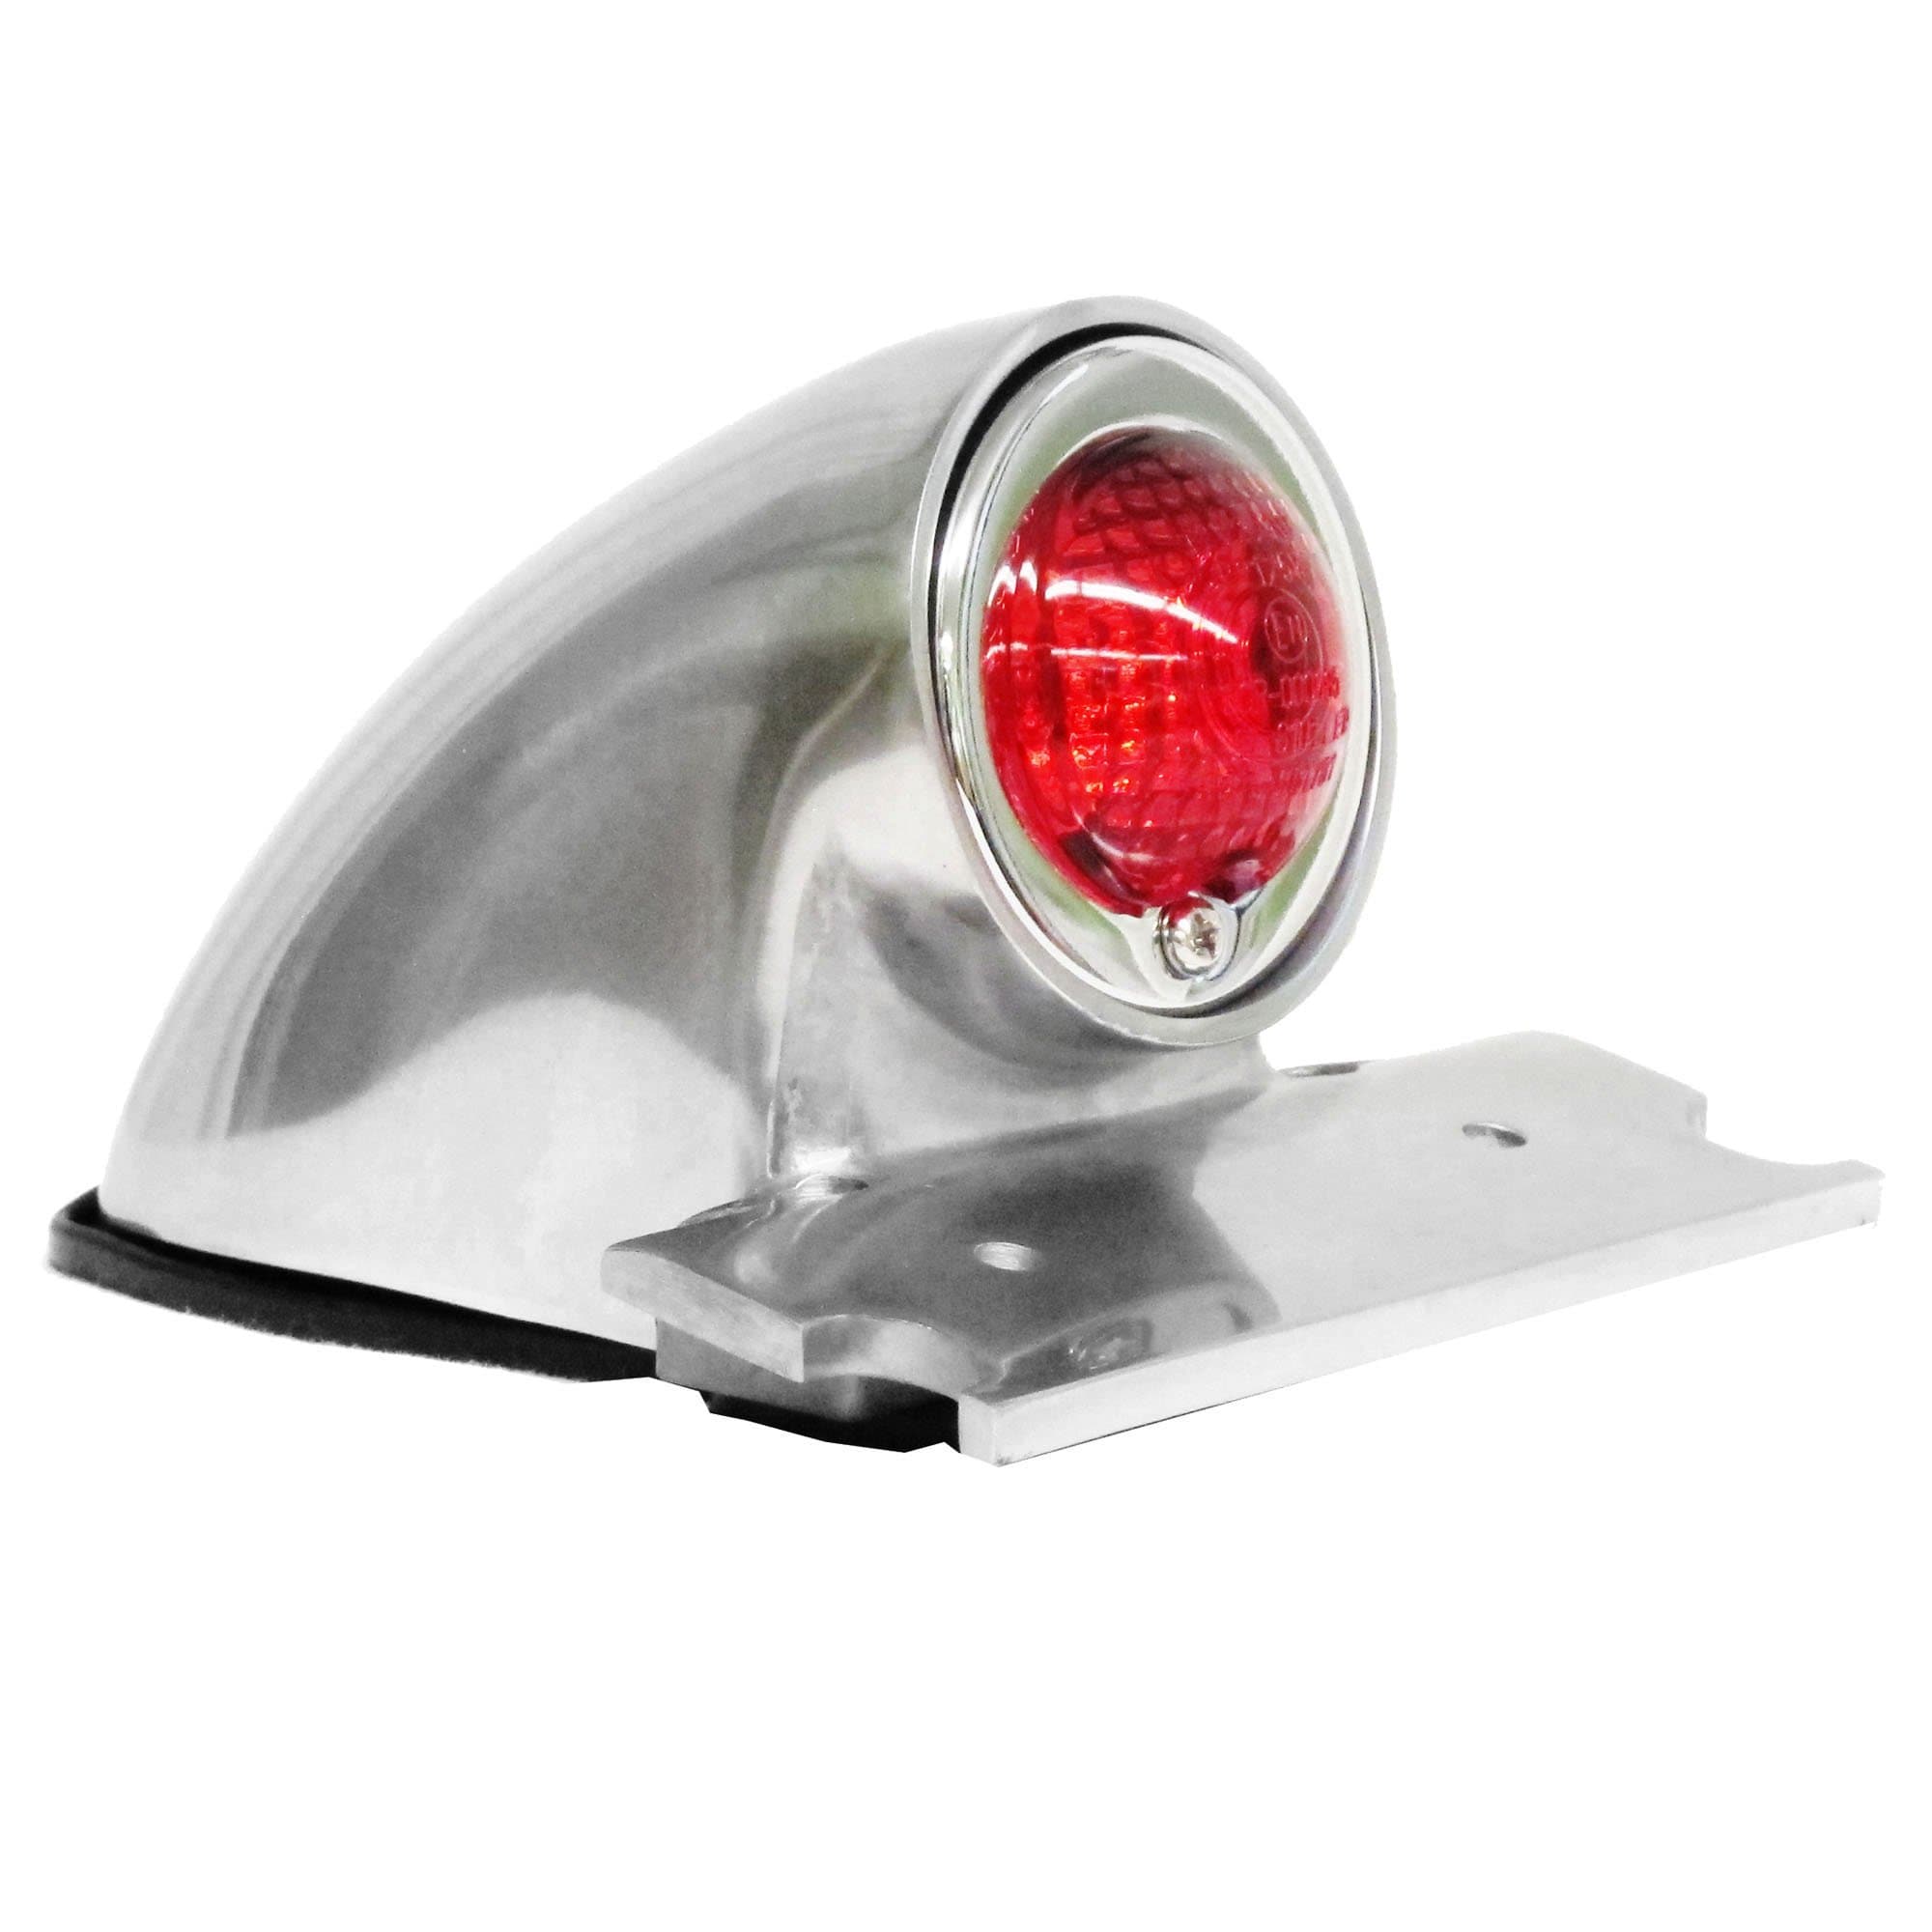 Cycle Standard - Sparto Polished Aluminum Tail Light - 12V